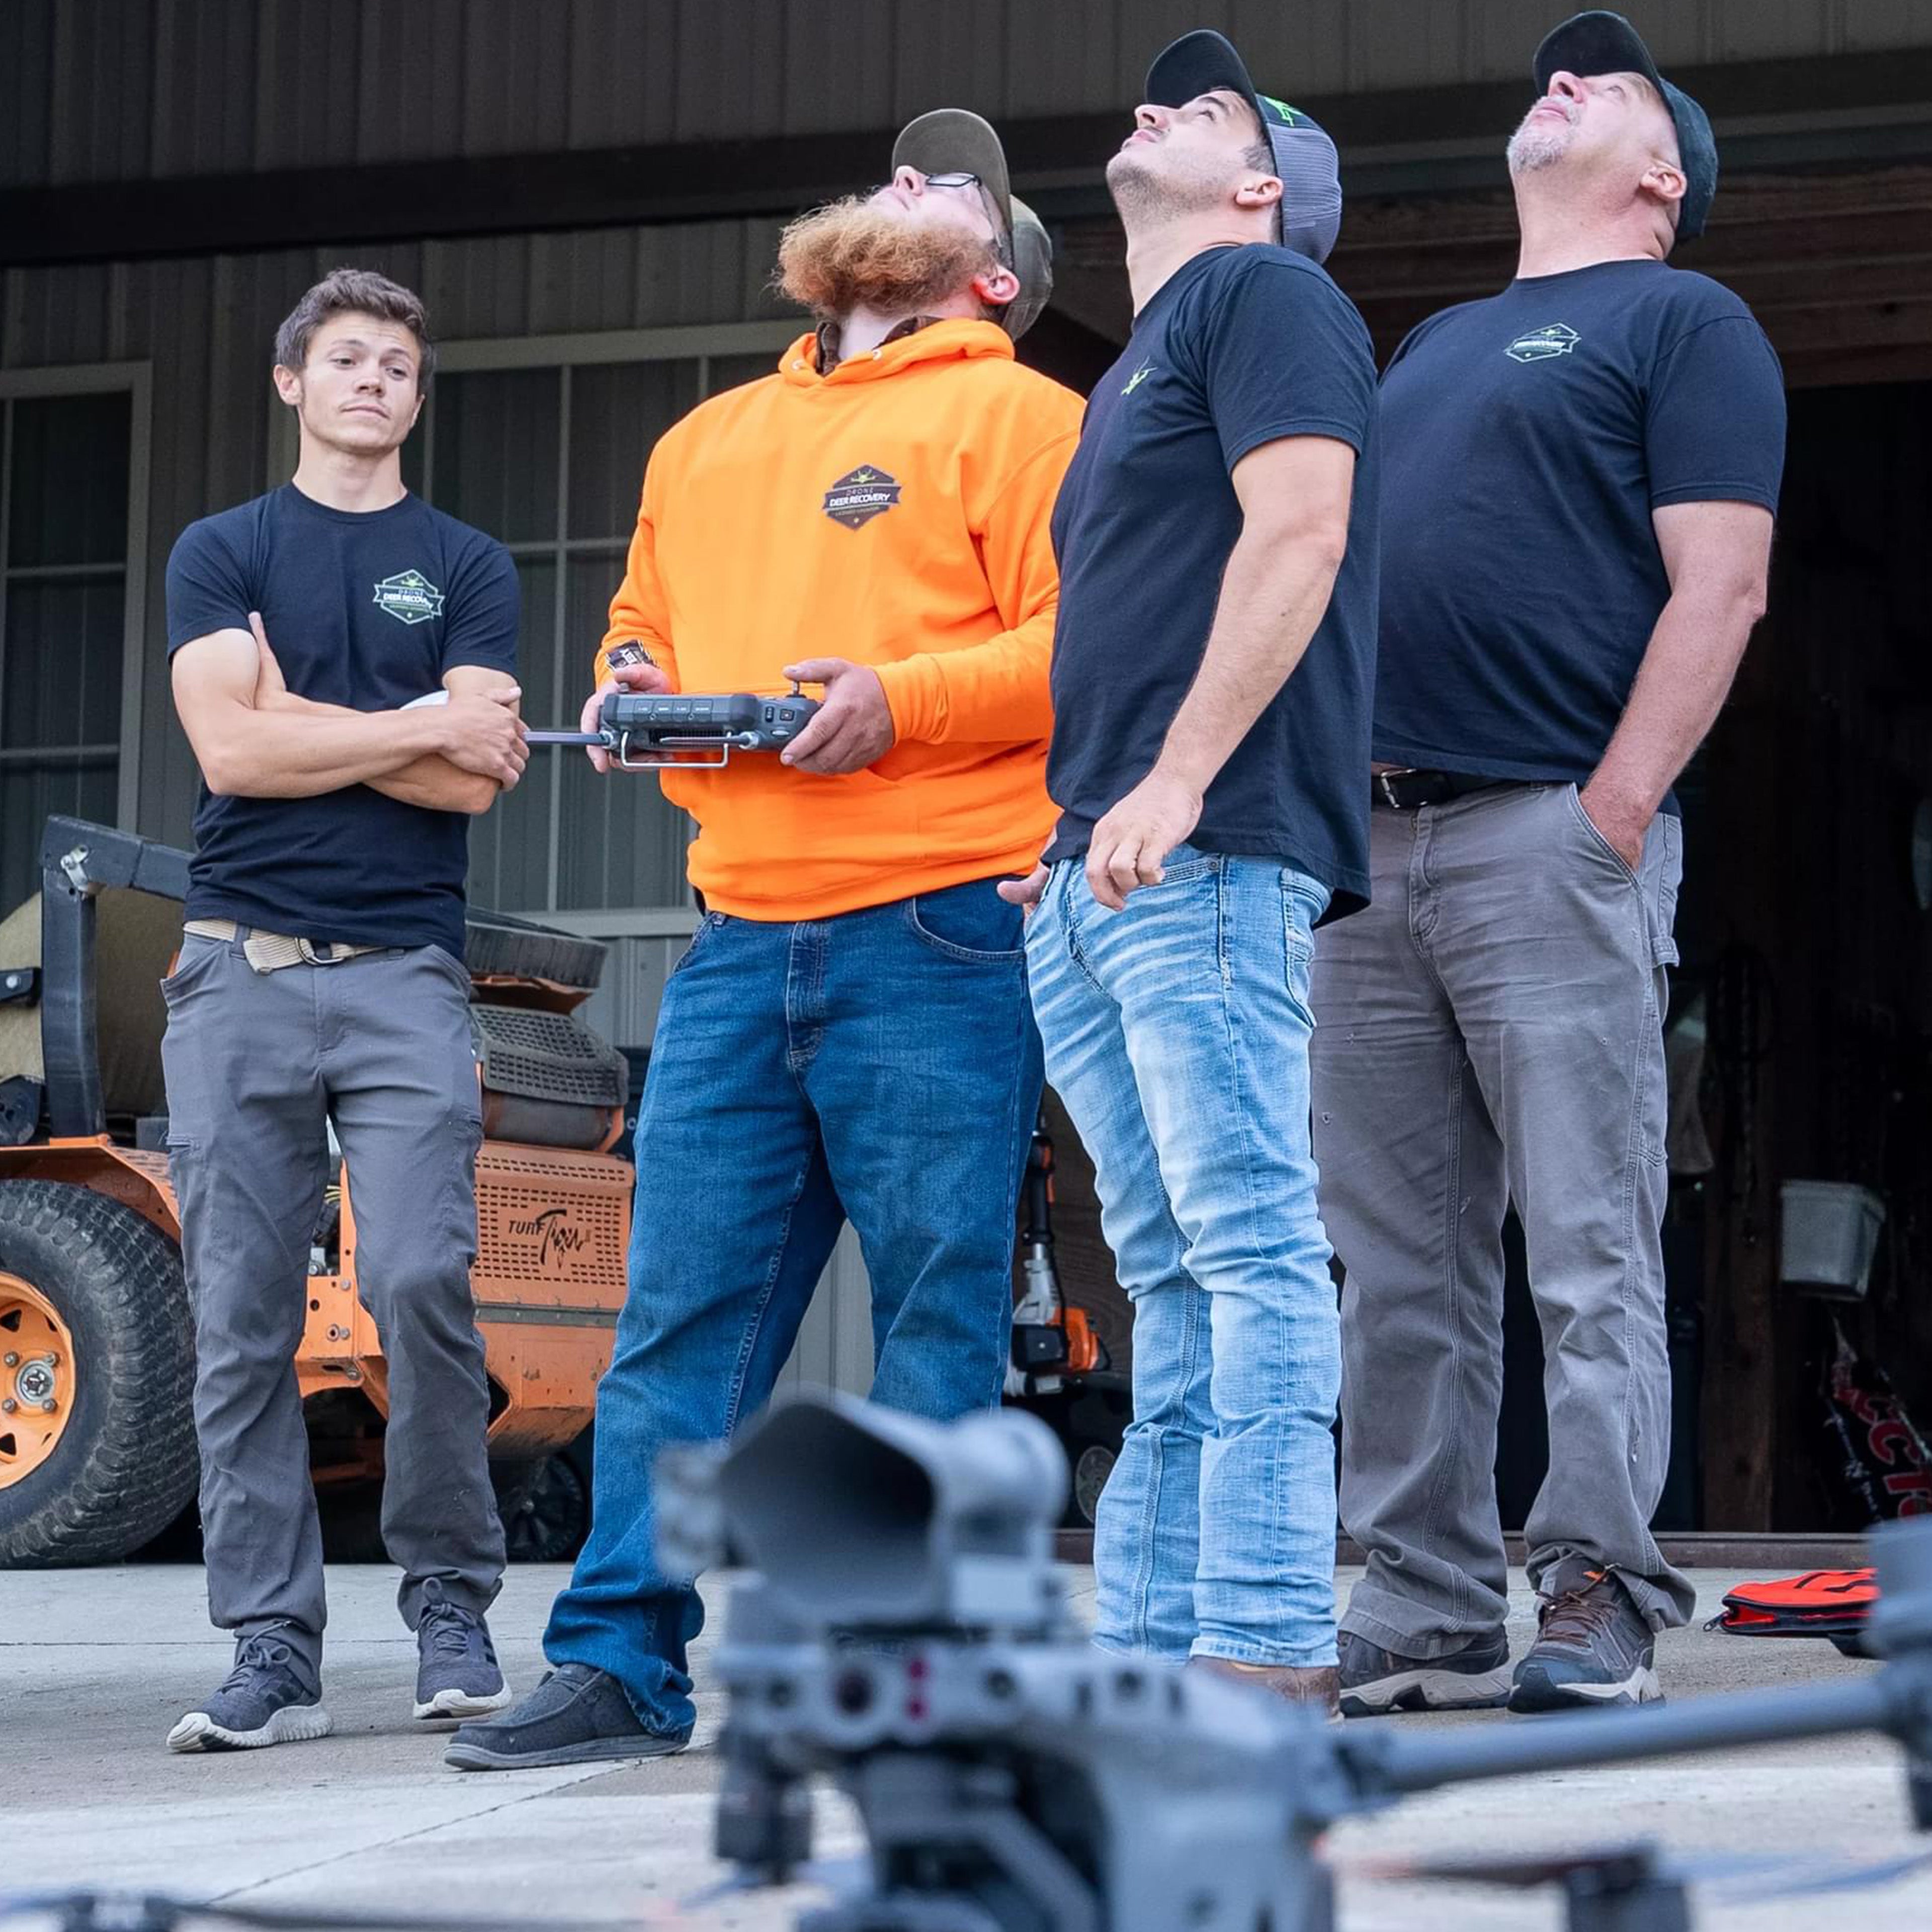 Matrice 30T Thermal Drone Training with Mike